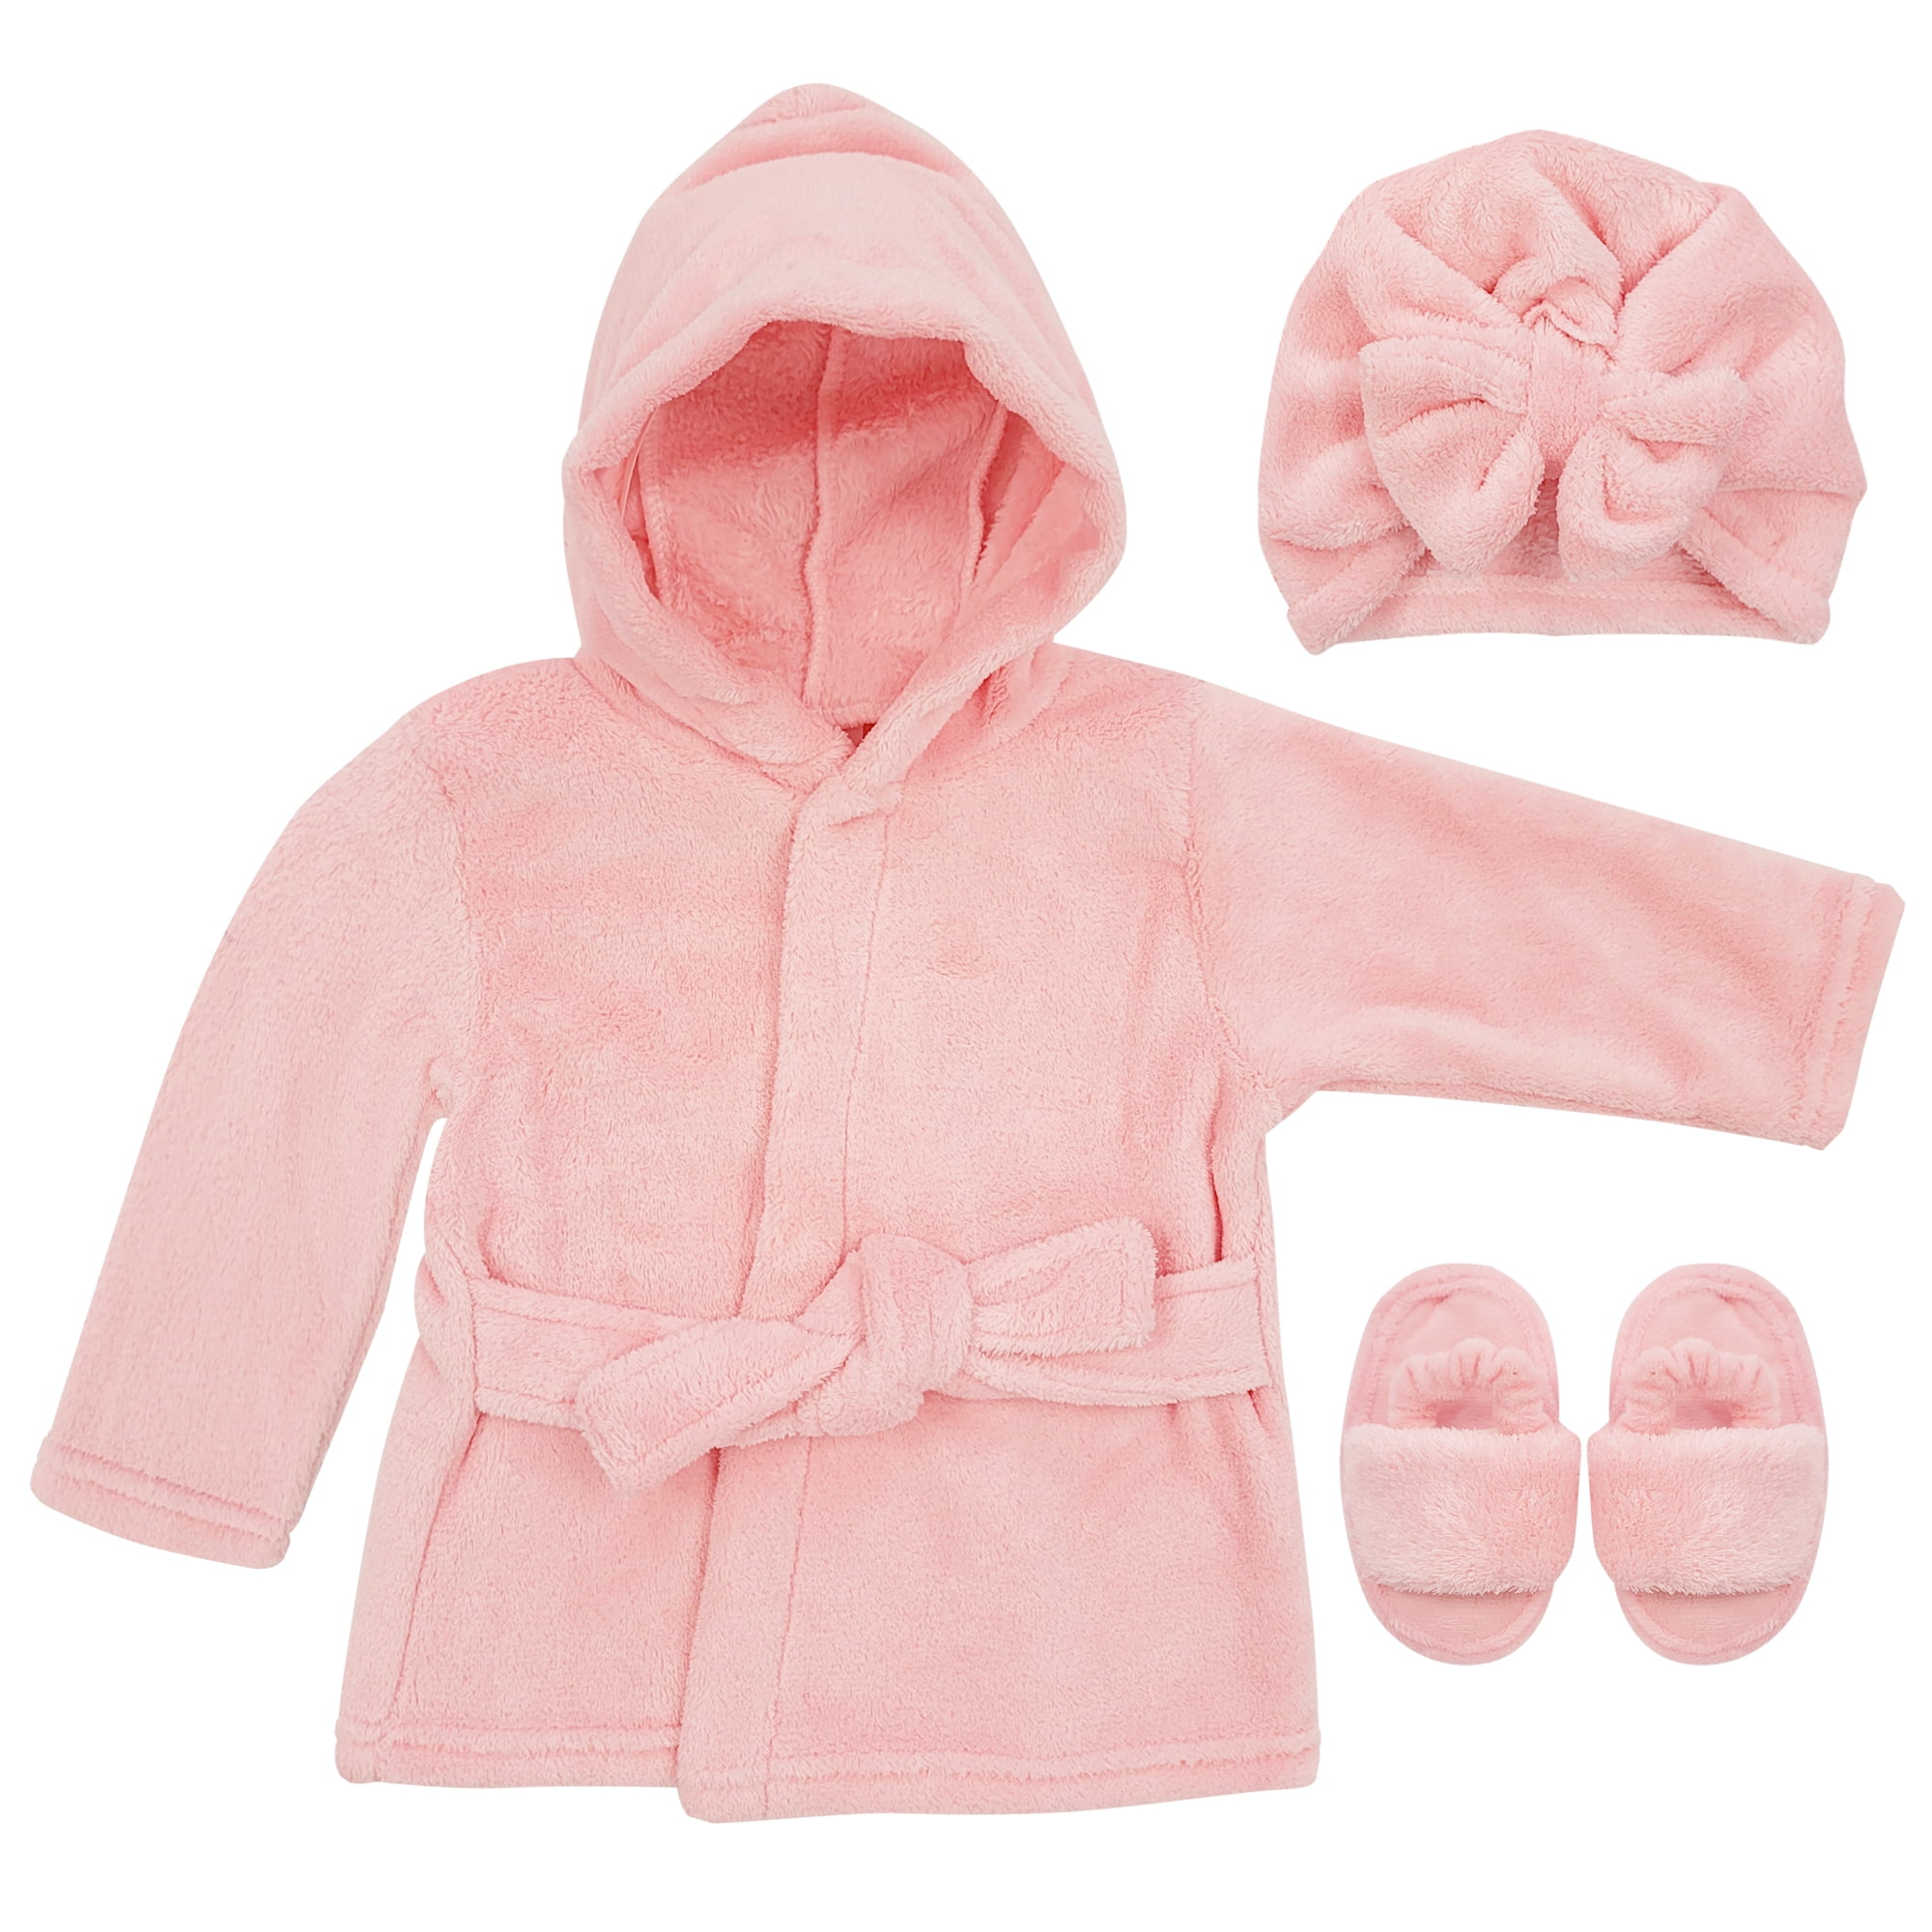 Rising Star Pink Baby Girls Bathrobe Towel, Slippers And Turban, Bath Robe  Spa Set For Infants 0-9 Months : Target